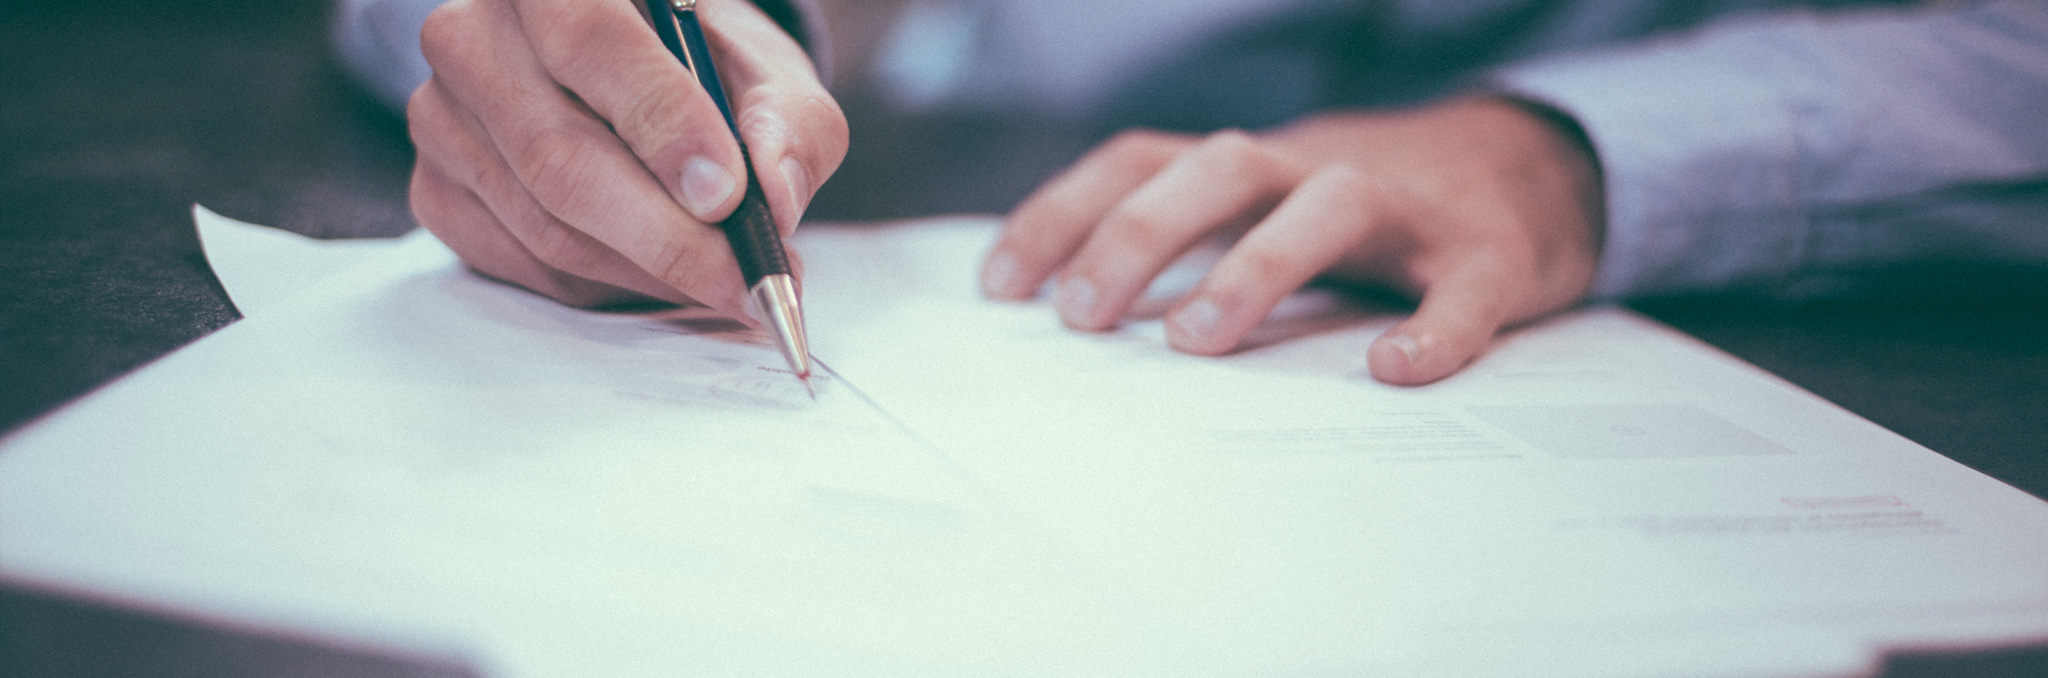 Person signing documents. Photo by Helloquence on Unsplash